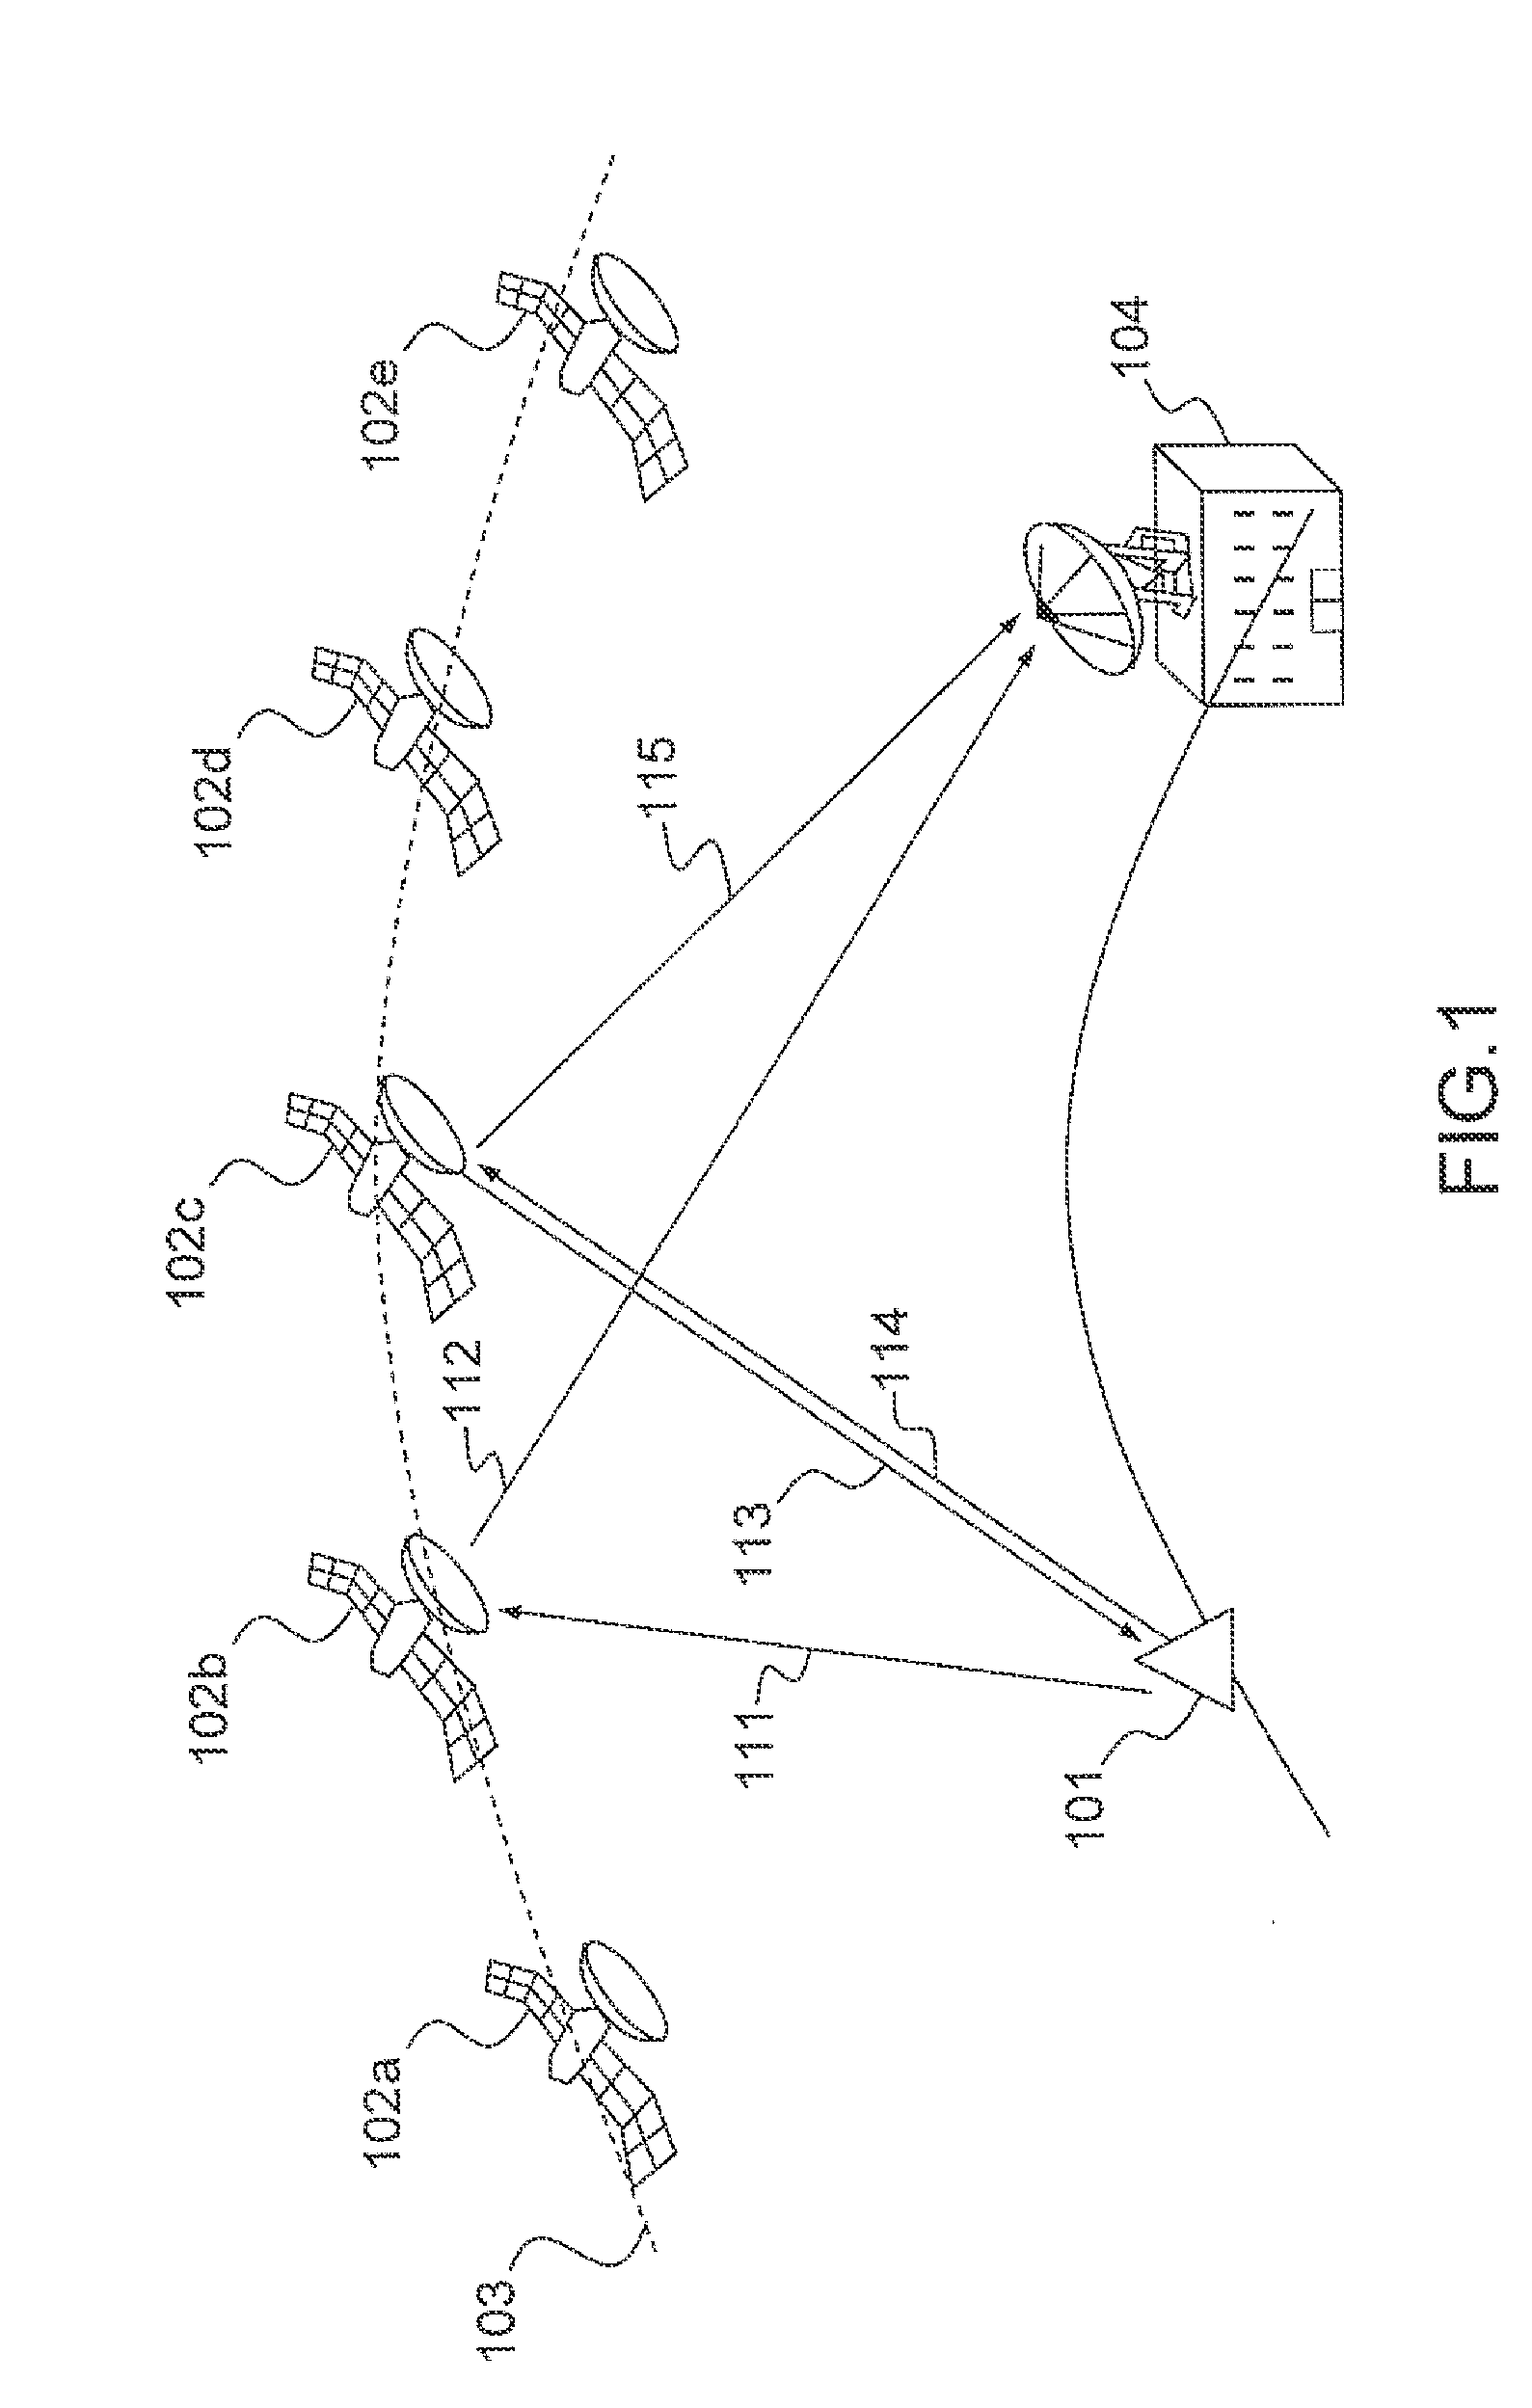 Method and System for the Geolocation of a Radio Beacon in a Search and Rescue System